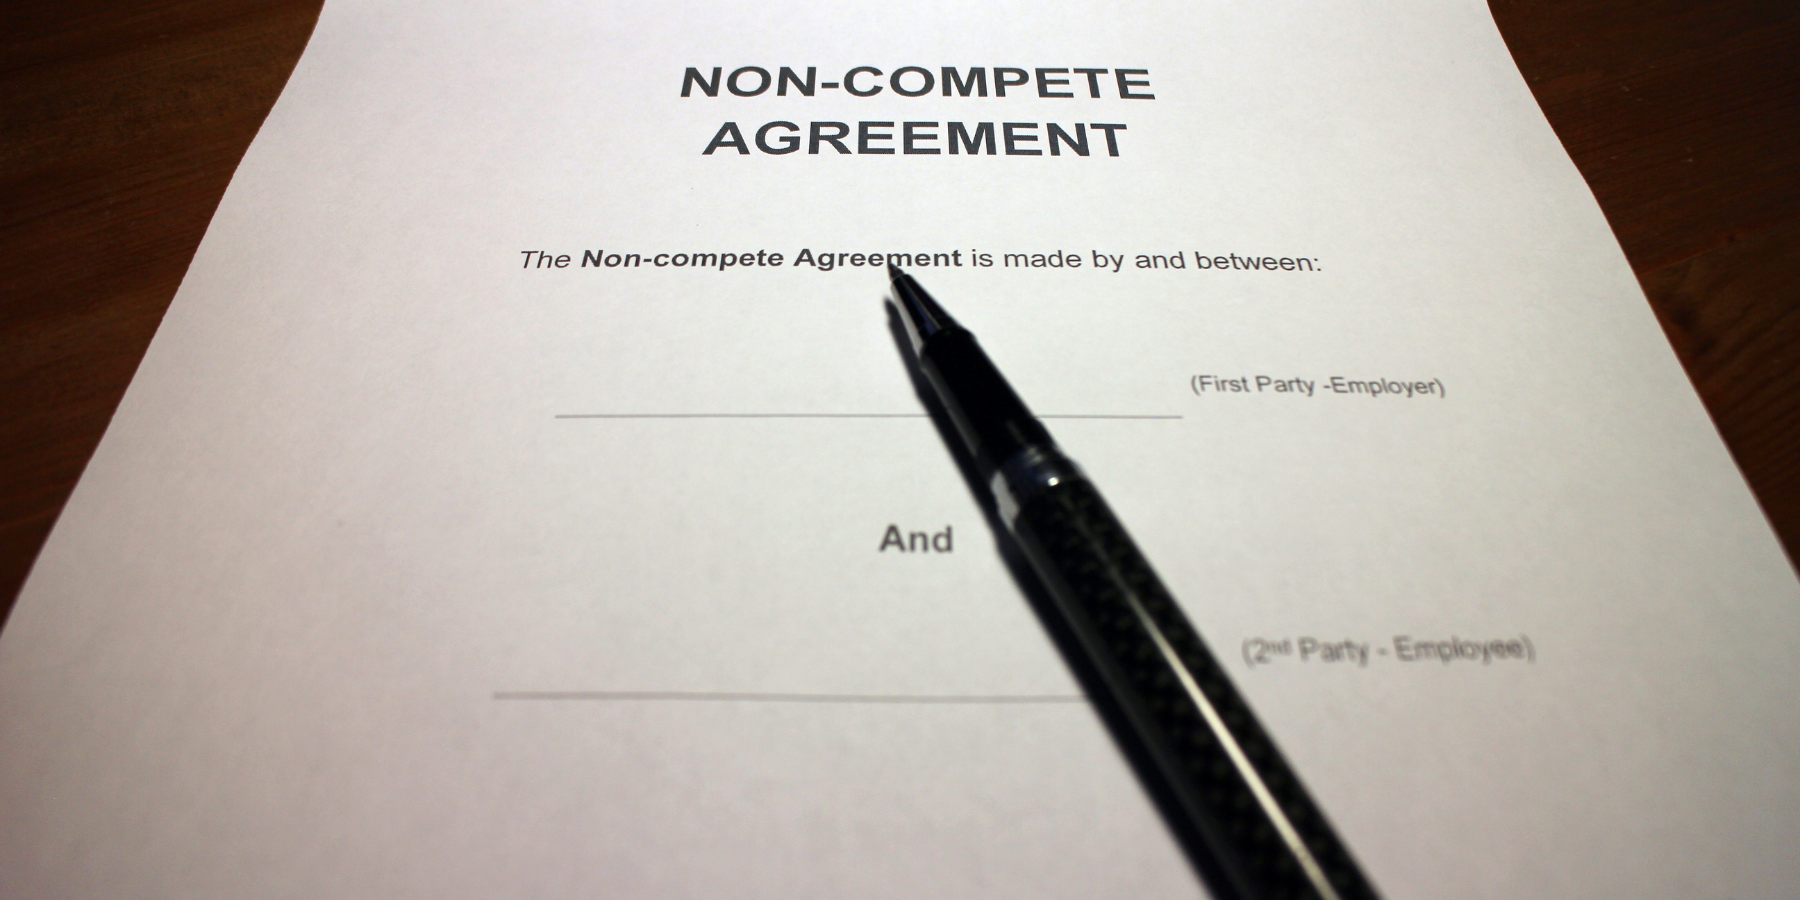 Proposed U.S. Ban on Non-Compete Clauses: What Are the Implications?